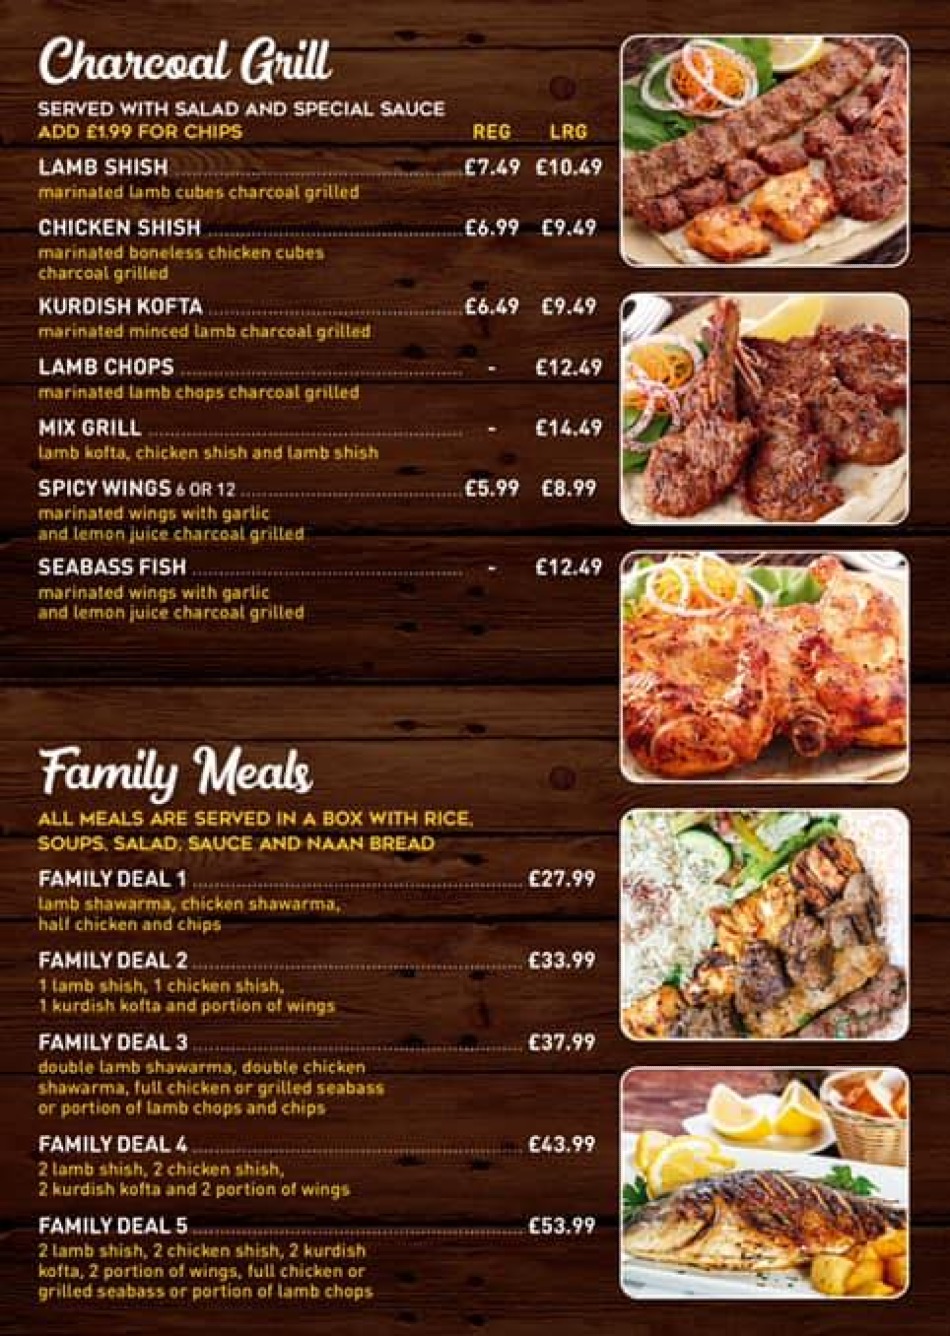 Takeaway Restaurant Menu Page - Chester Charcoal Grill - Chester